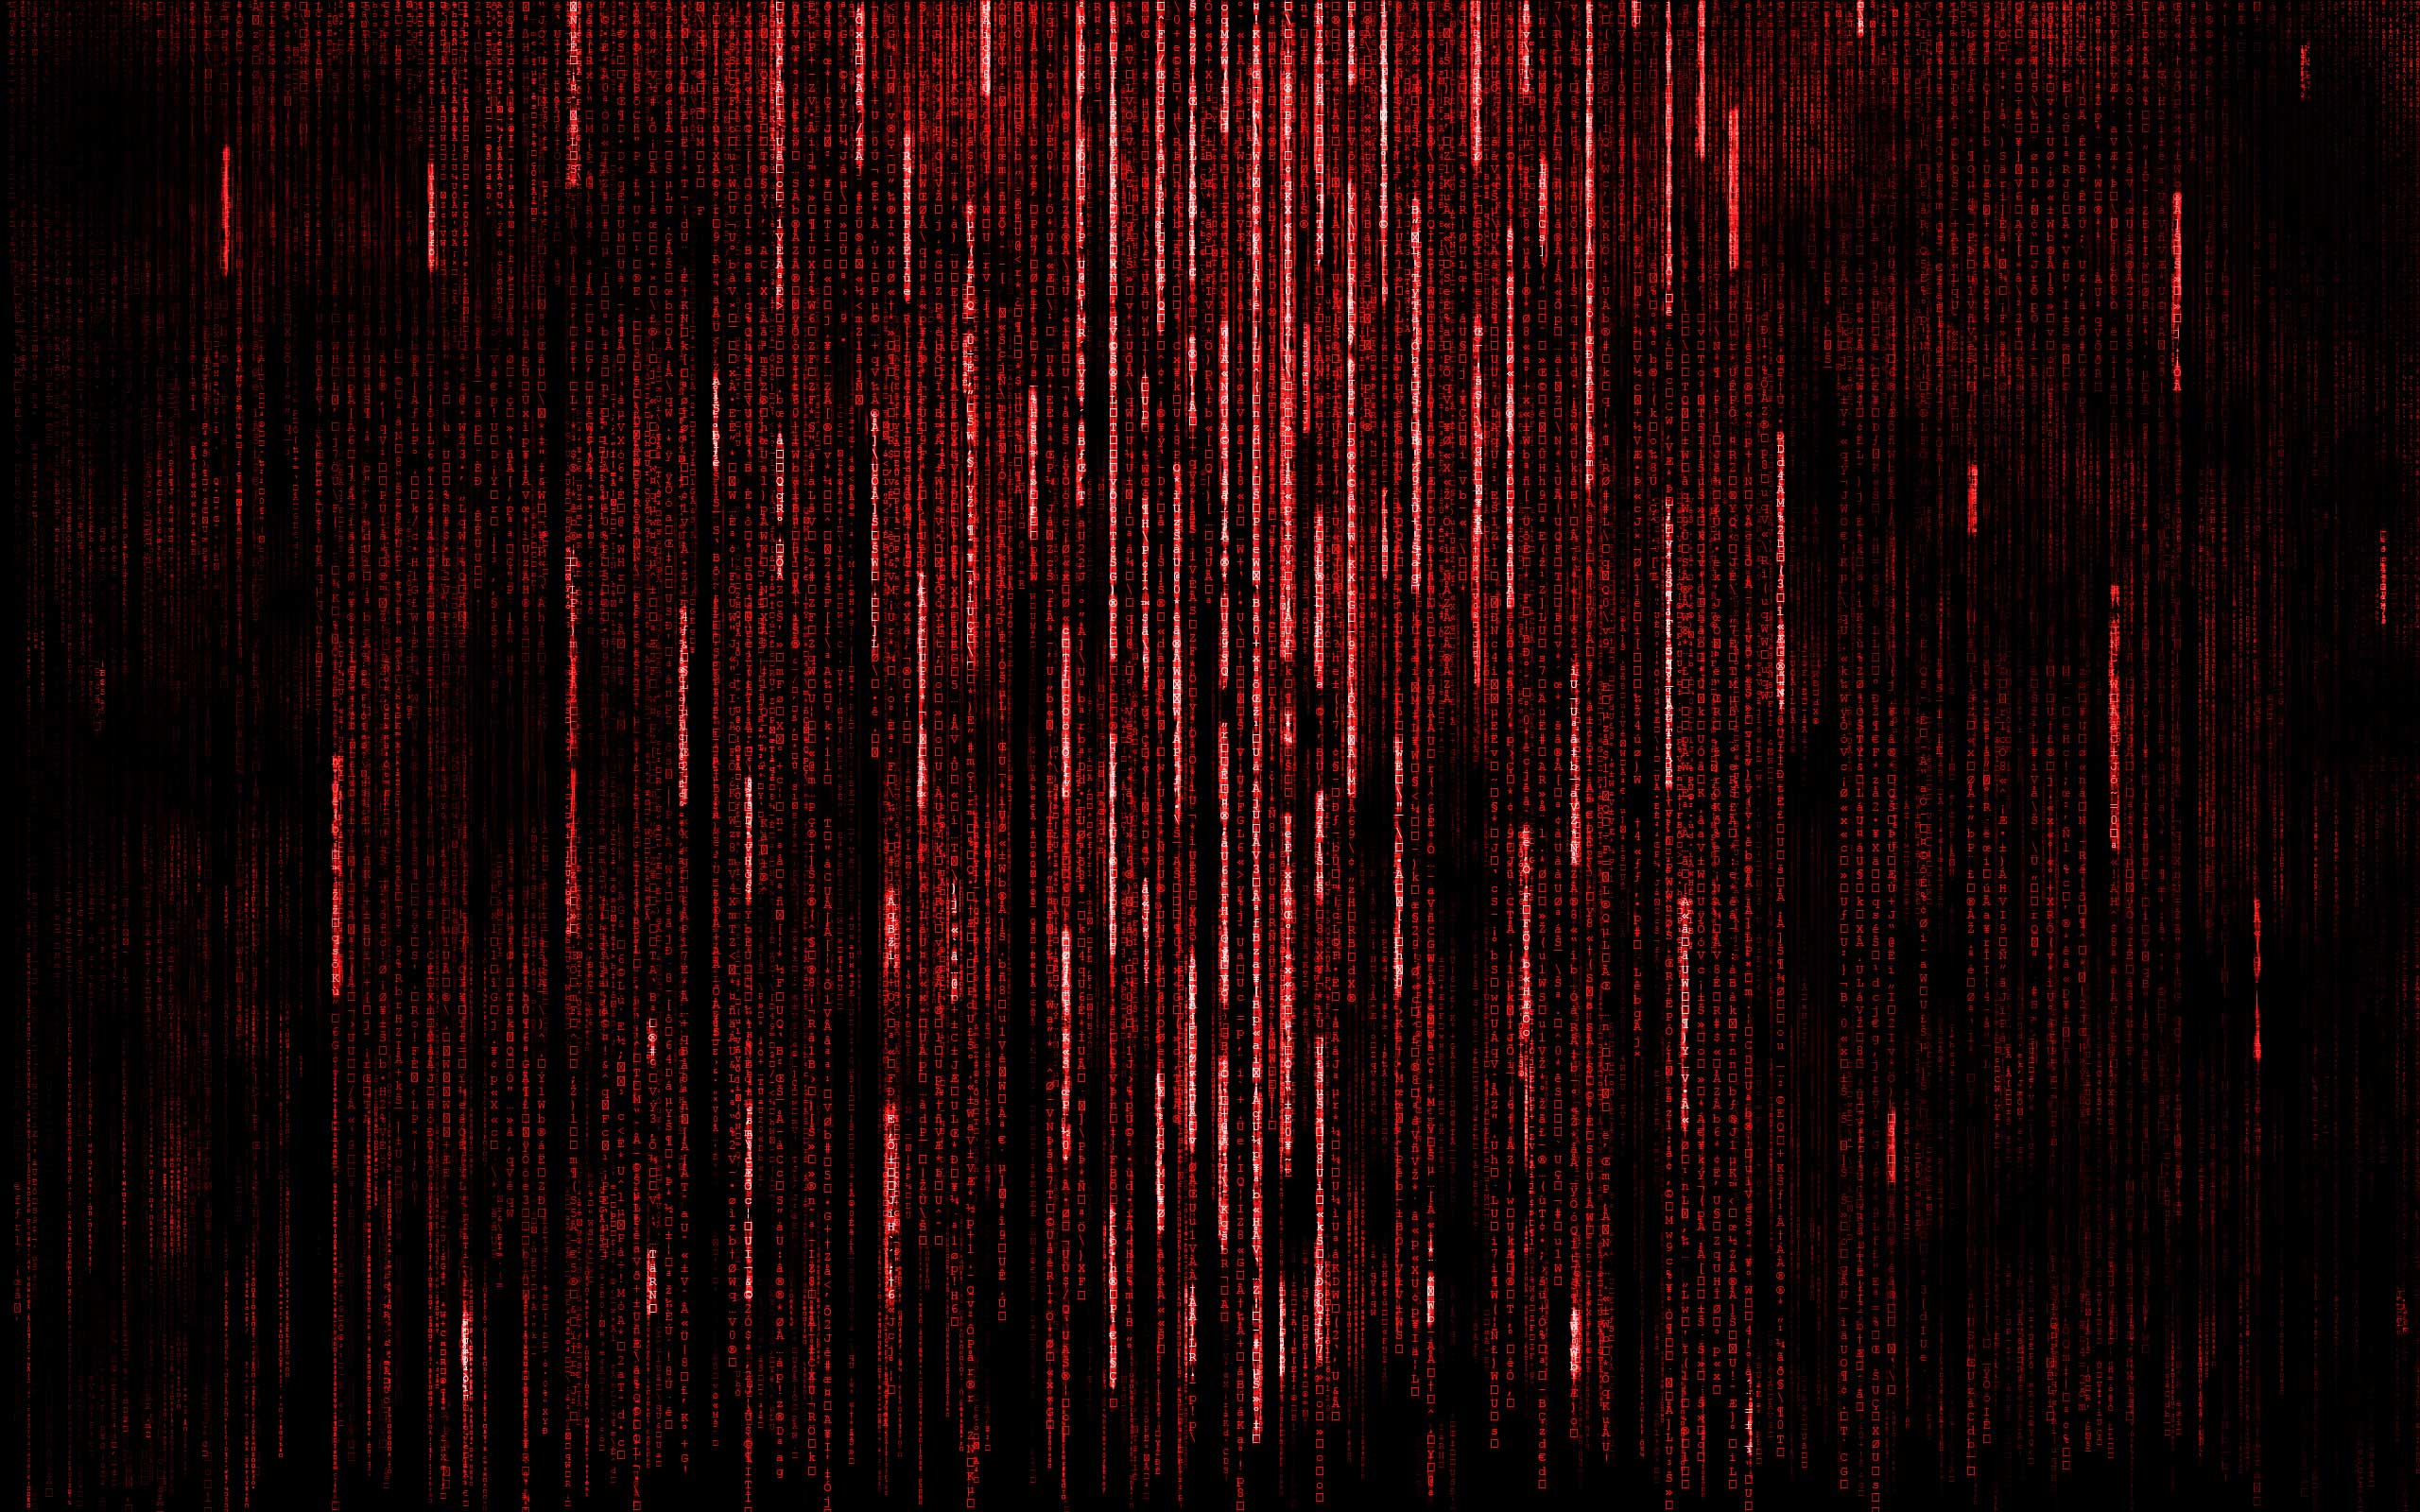 Red Matrix Code Android Wallpaper 52y01